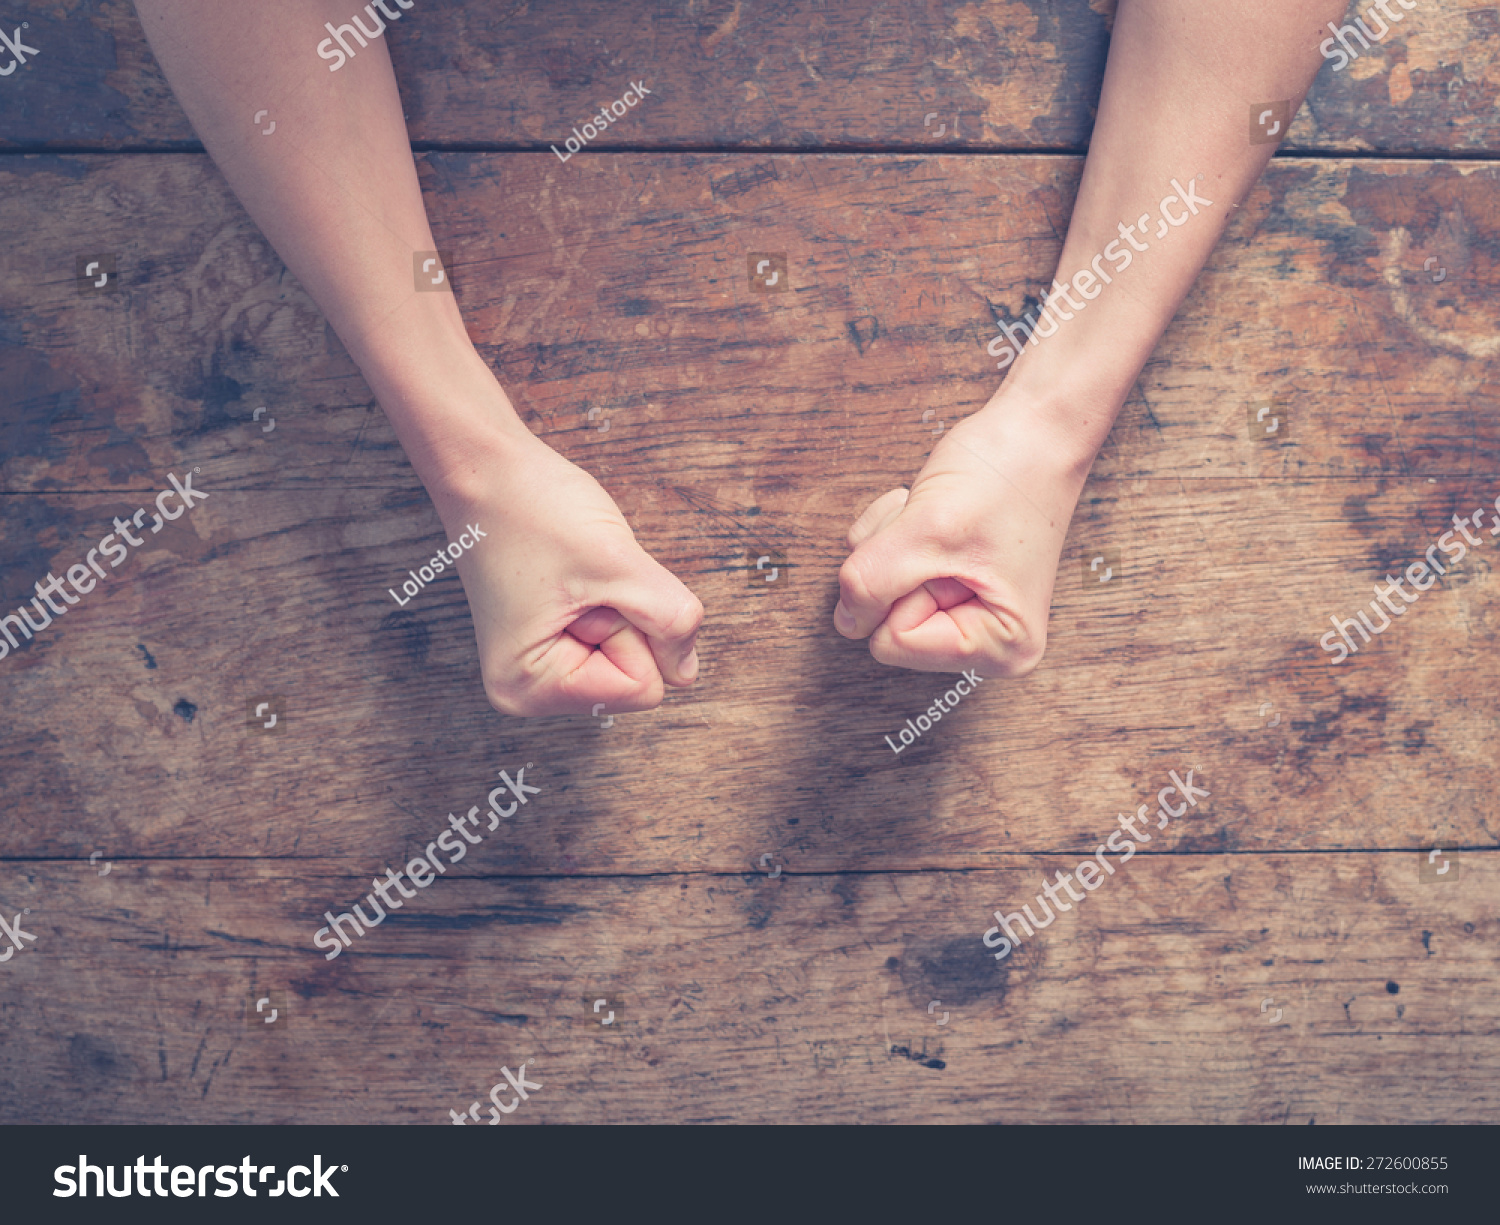 Female fists clenched on a wooden table in anger #272600855